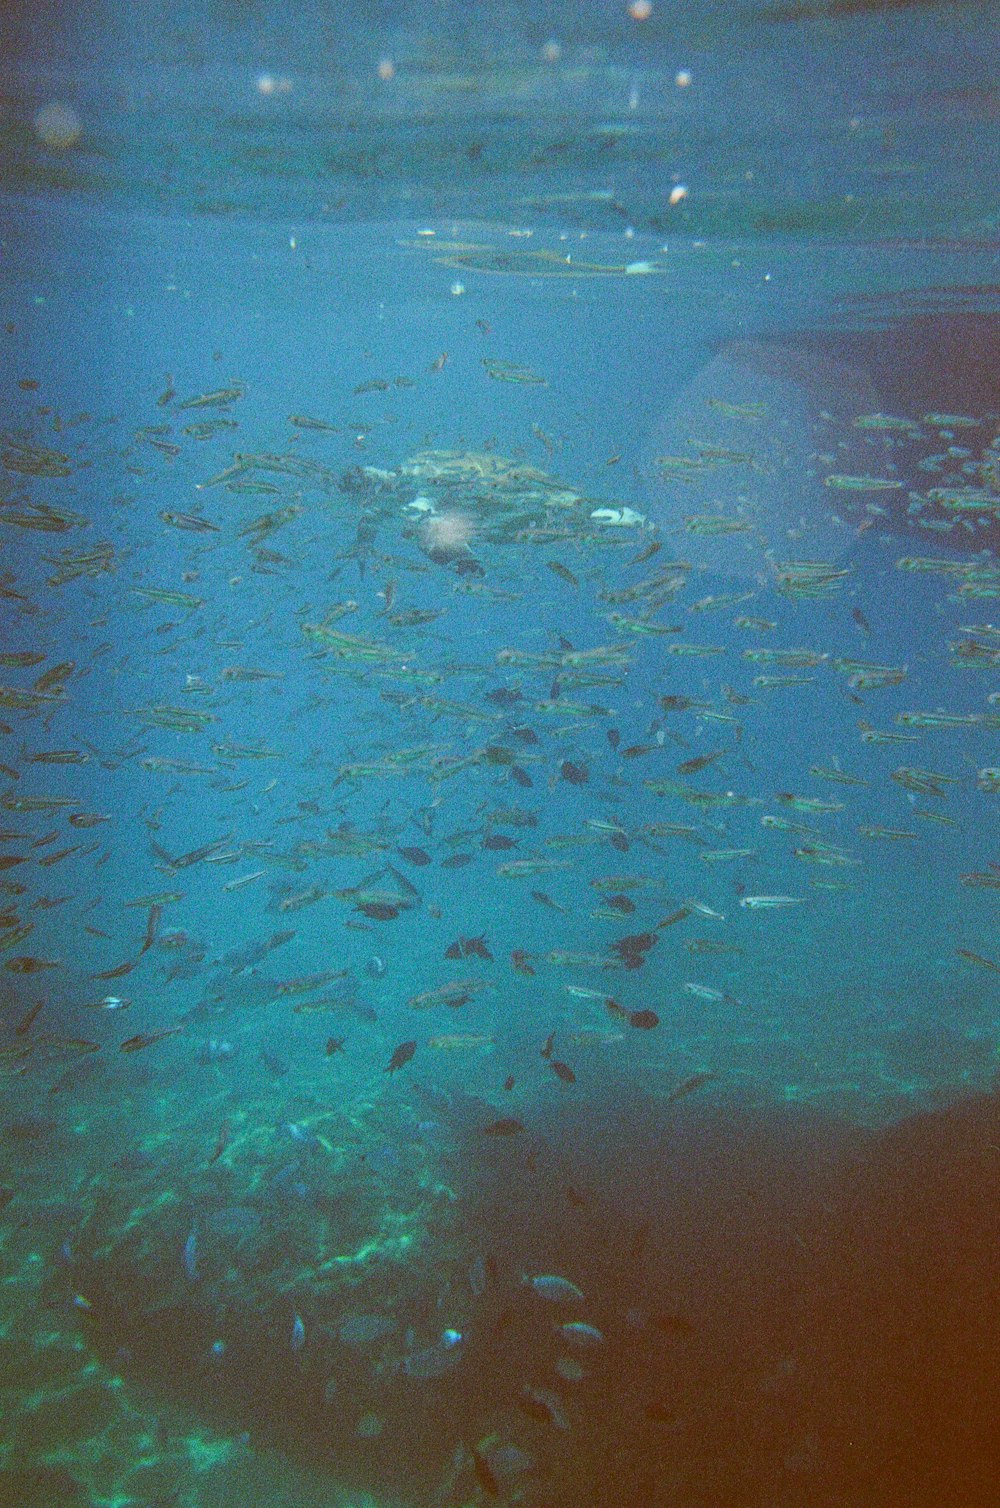 a large amount of fish swimming in the water